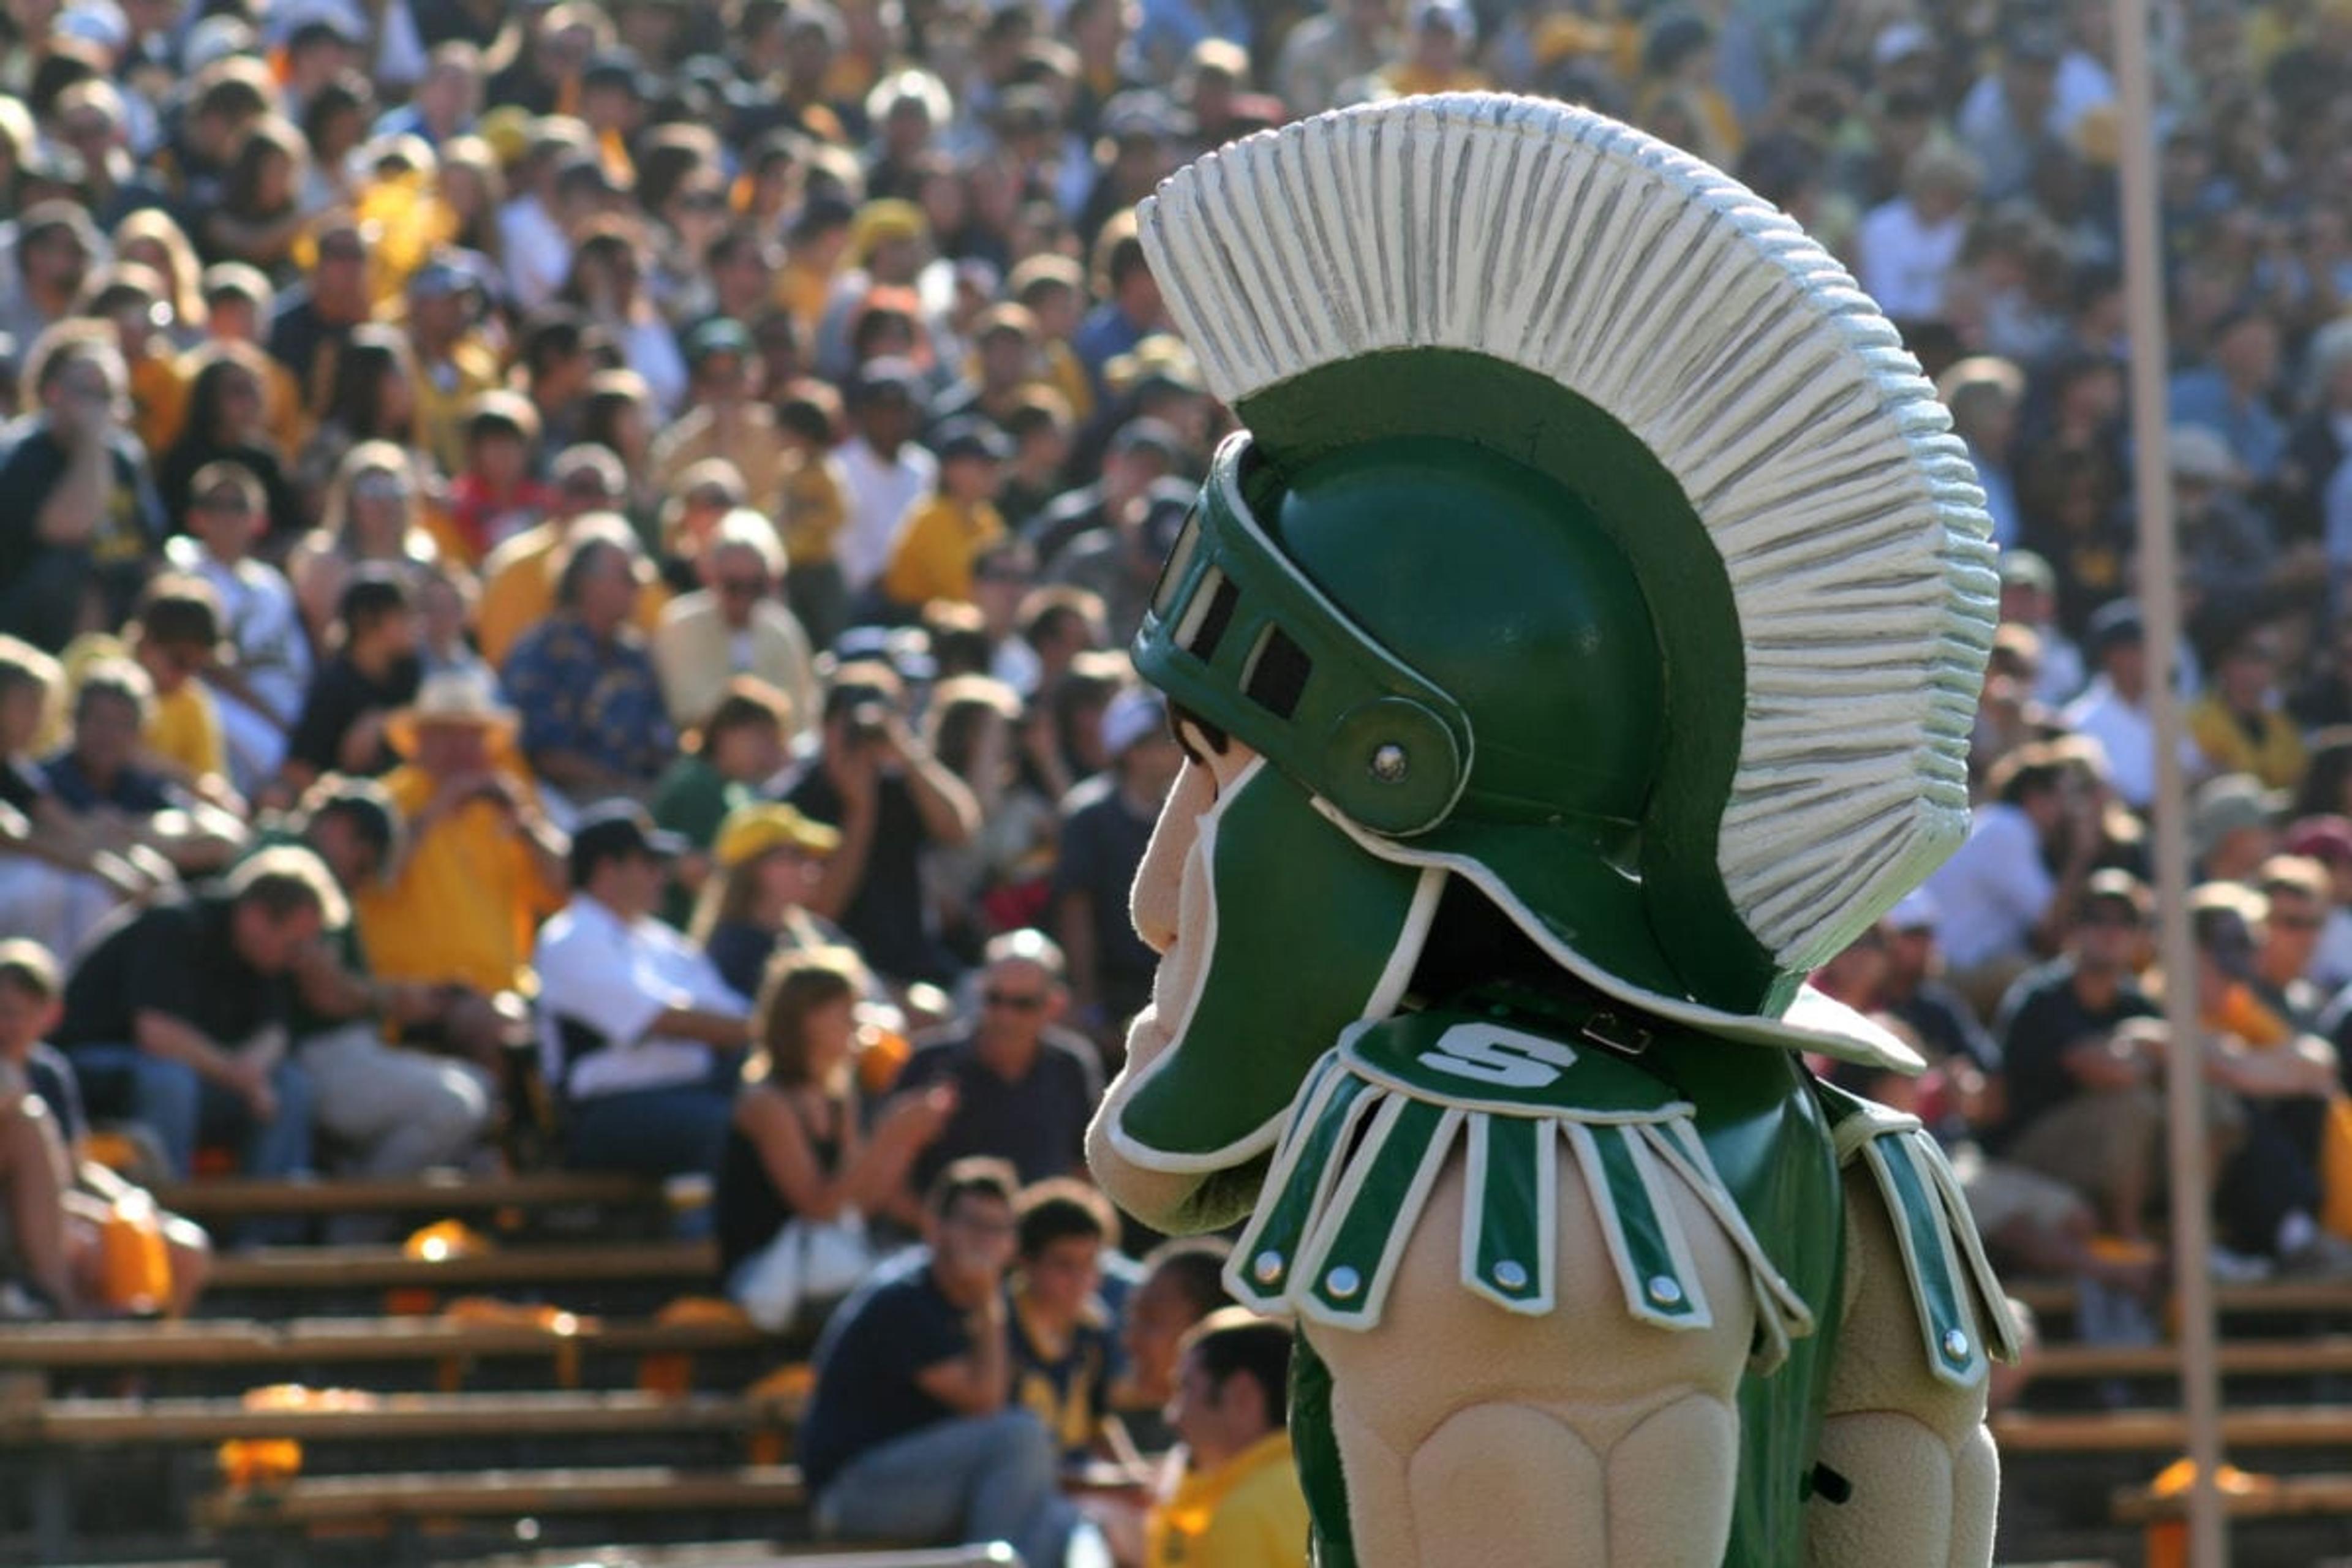 Sparty during a sporting event